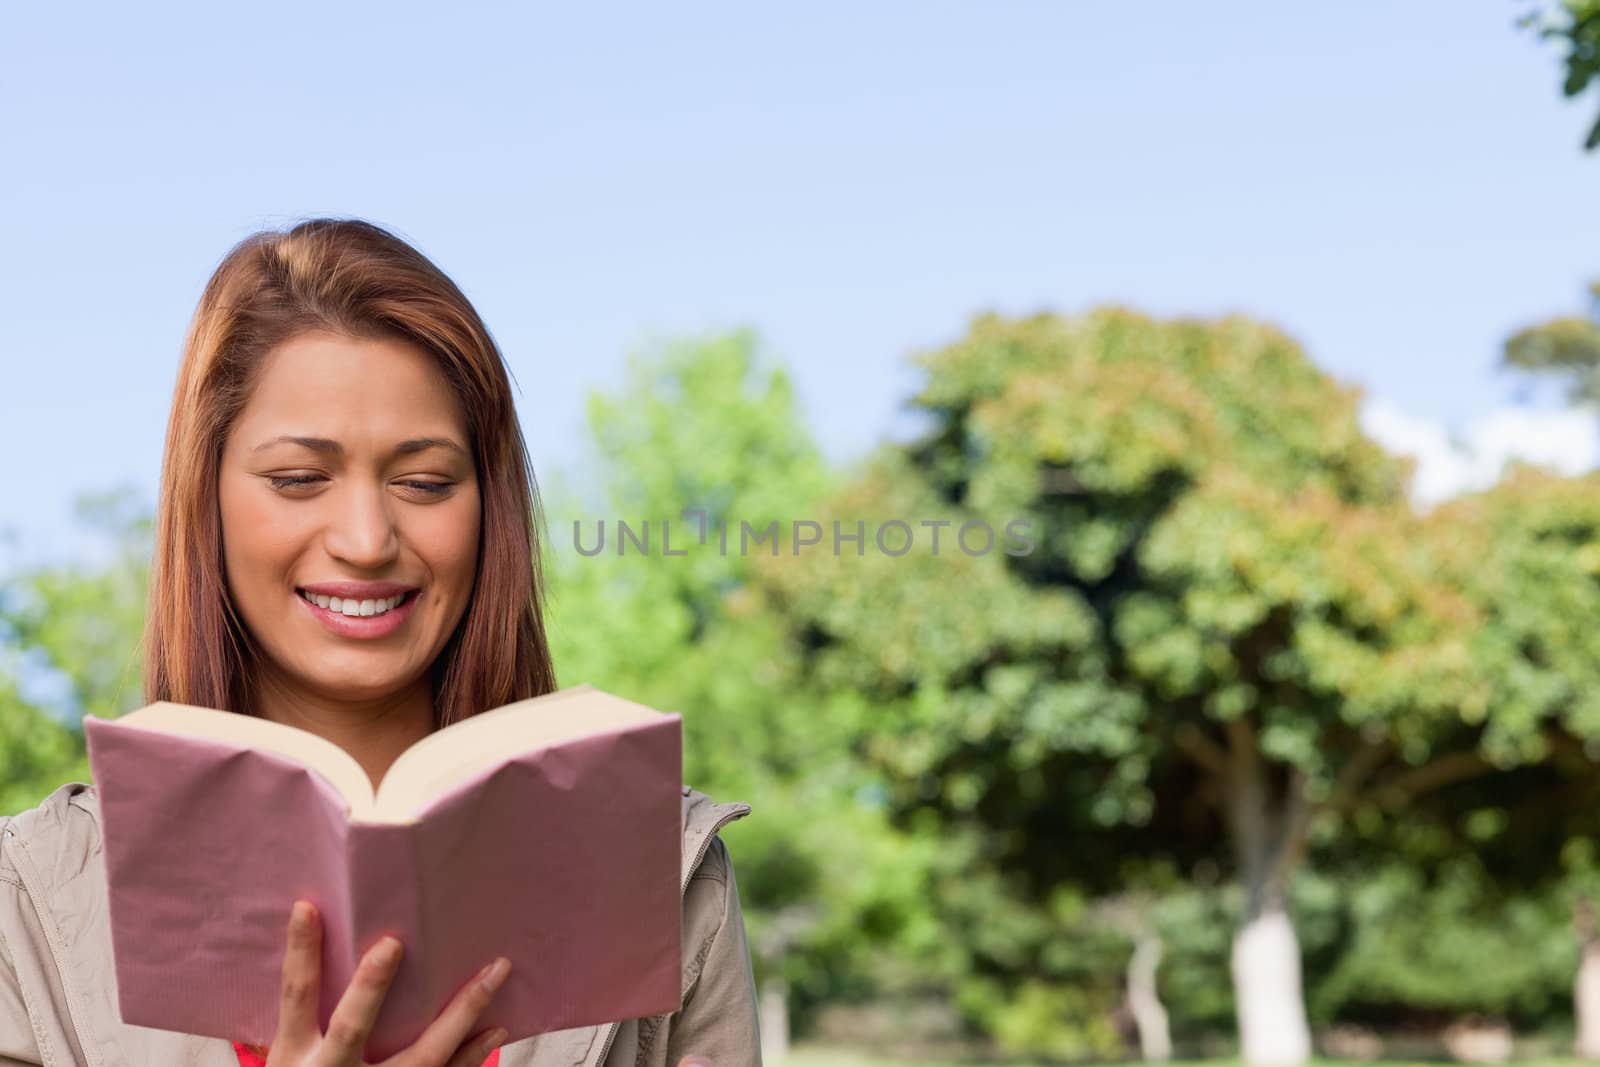 Young woman blissfully reading the book in her hands while in a sunny area surrounded by trees